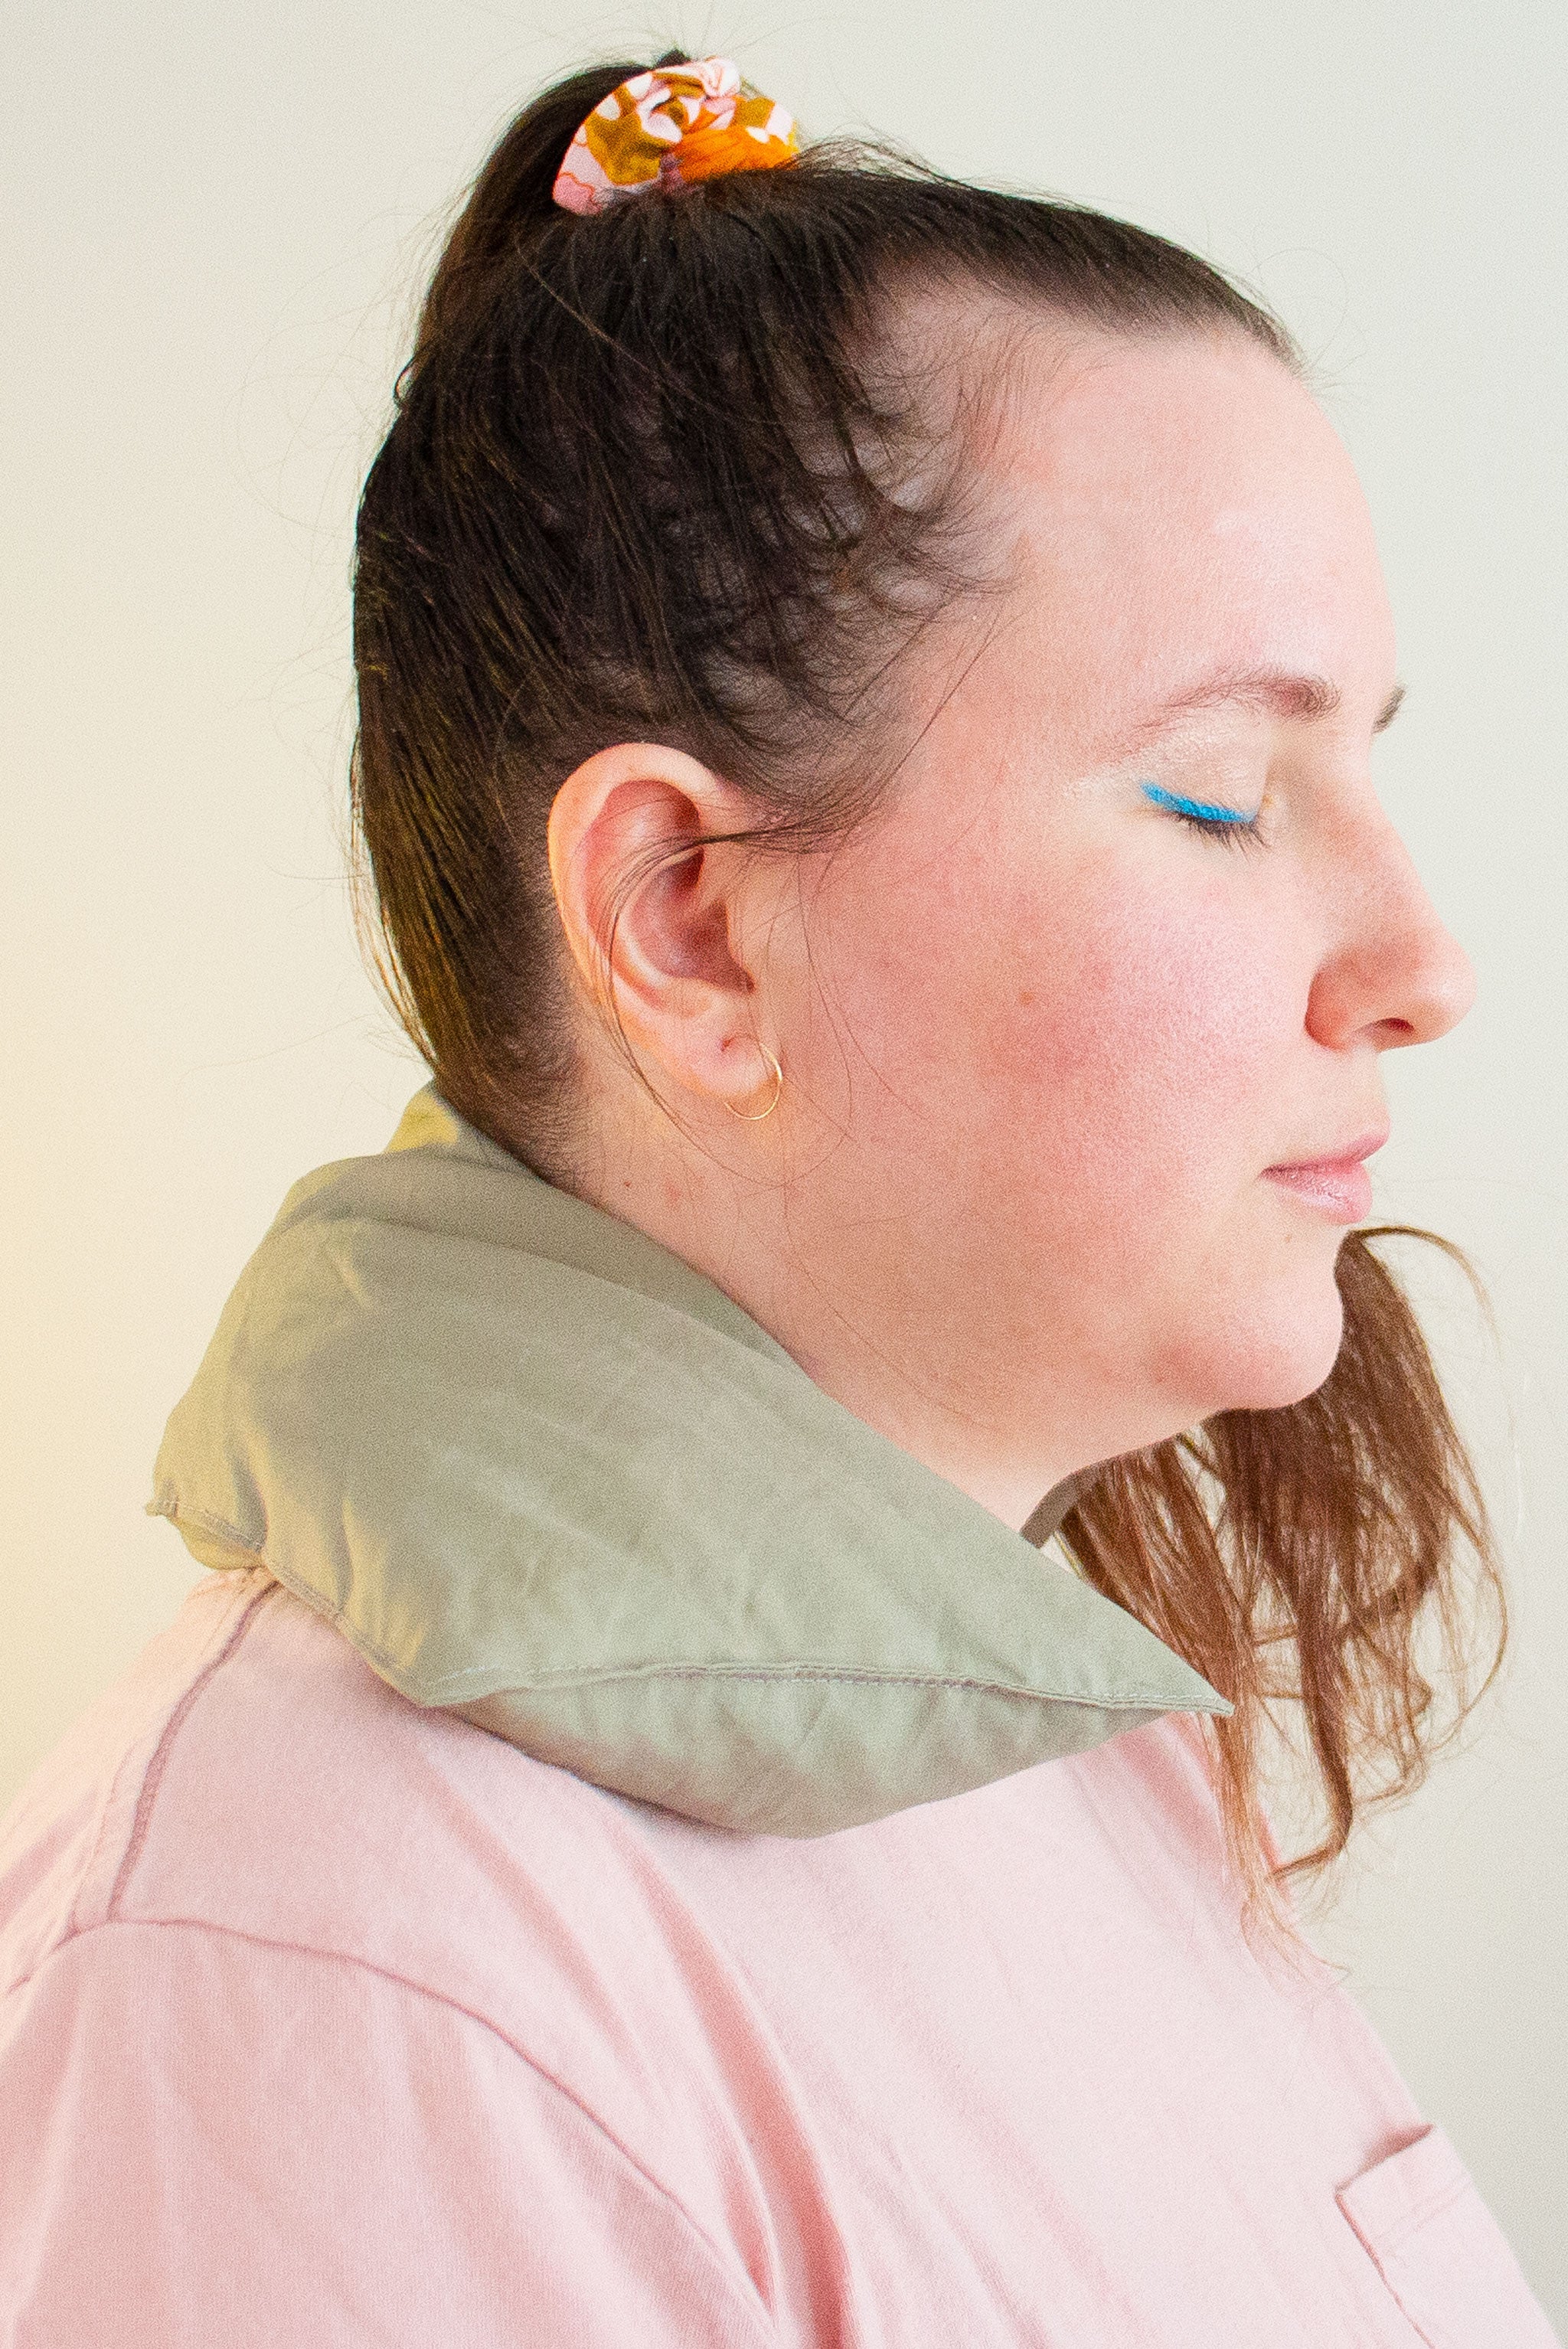 Profile of a woman with eyes closed wears a cherry pit grain bag around her neck.